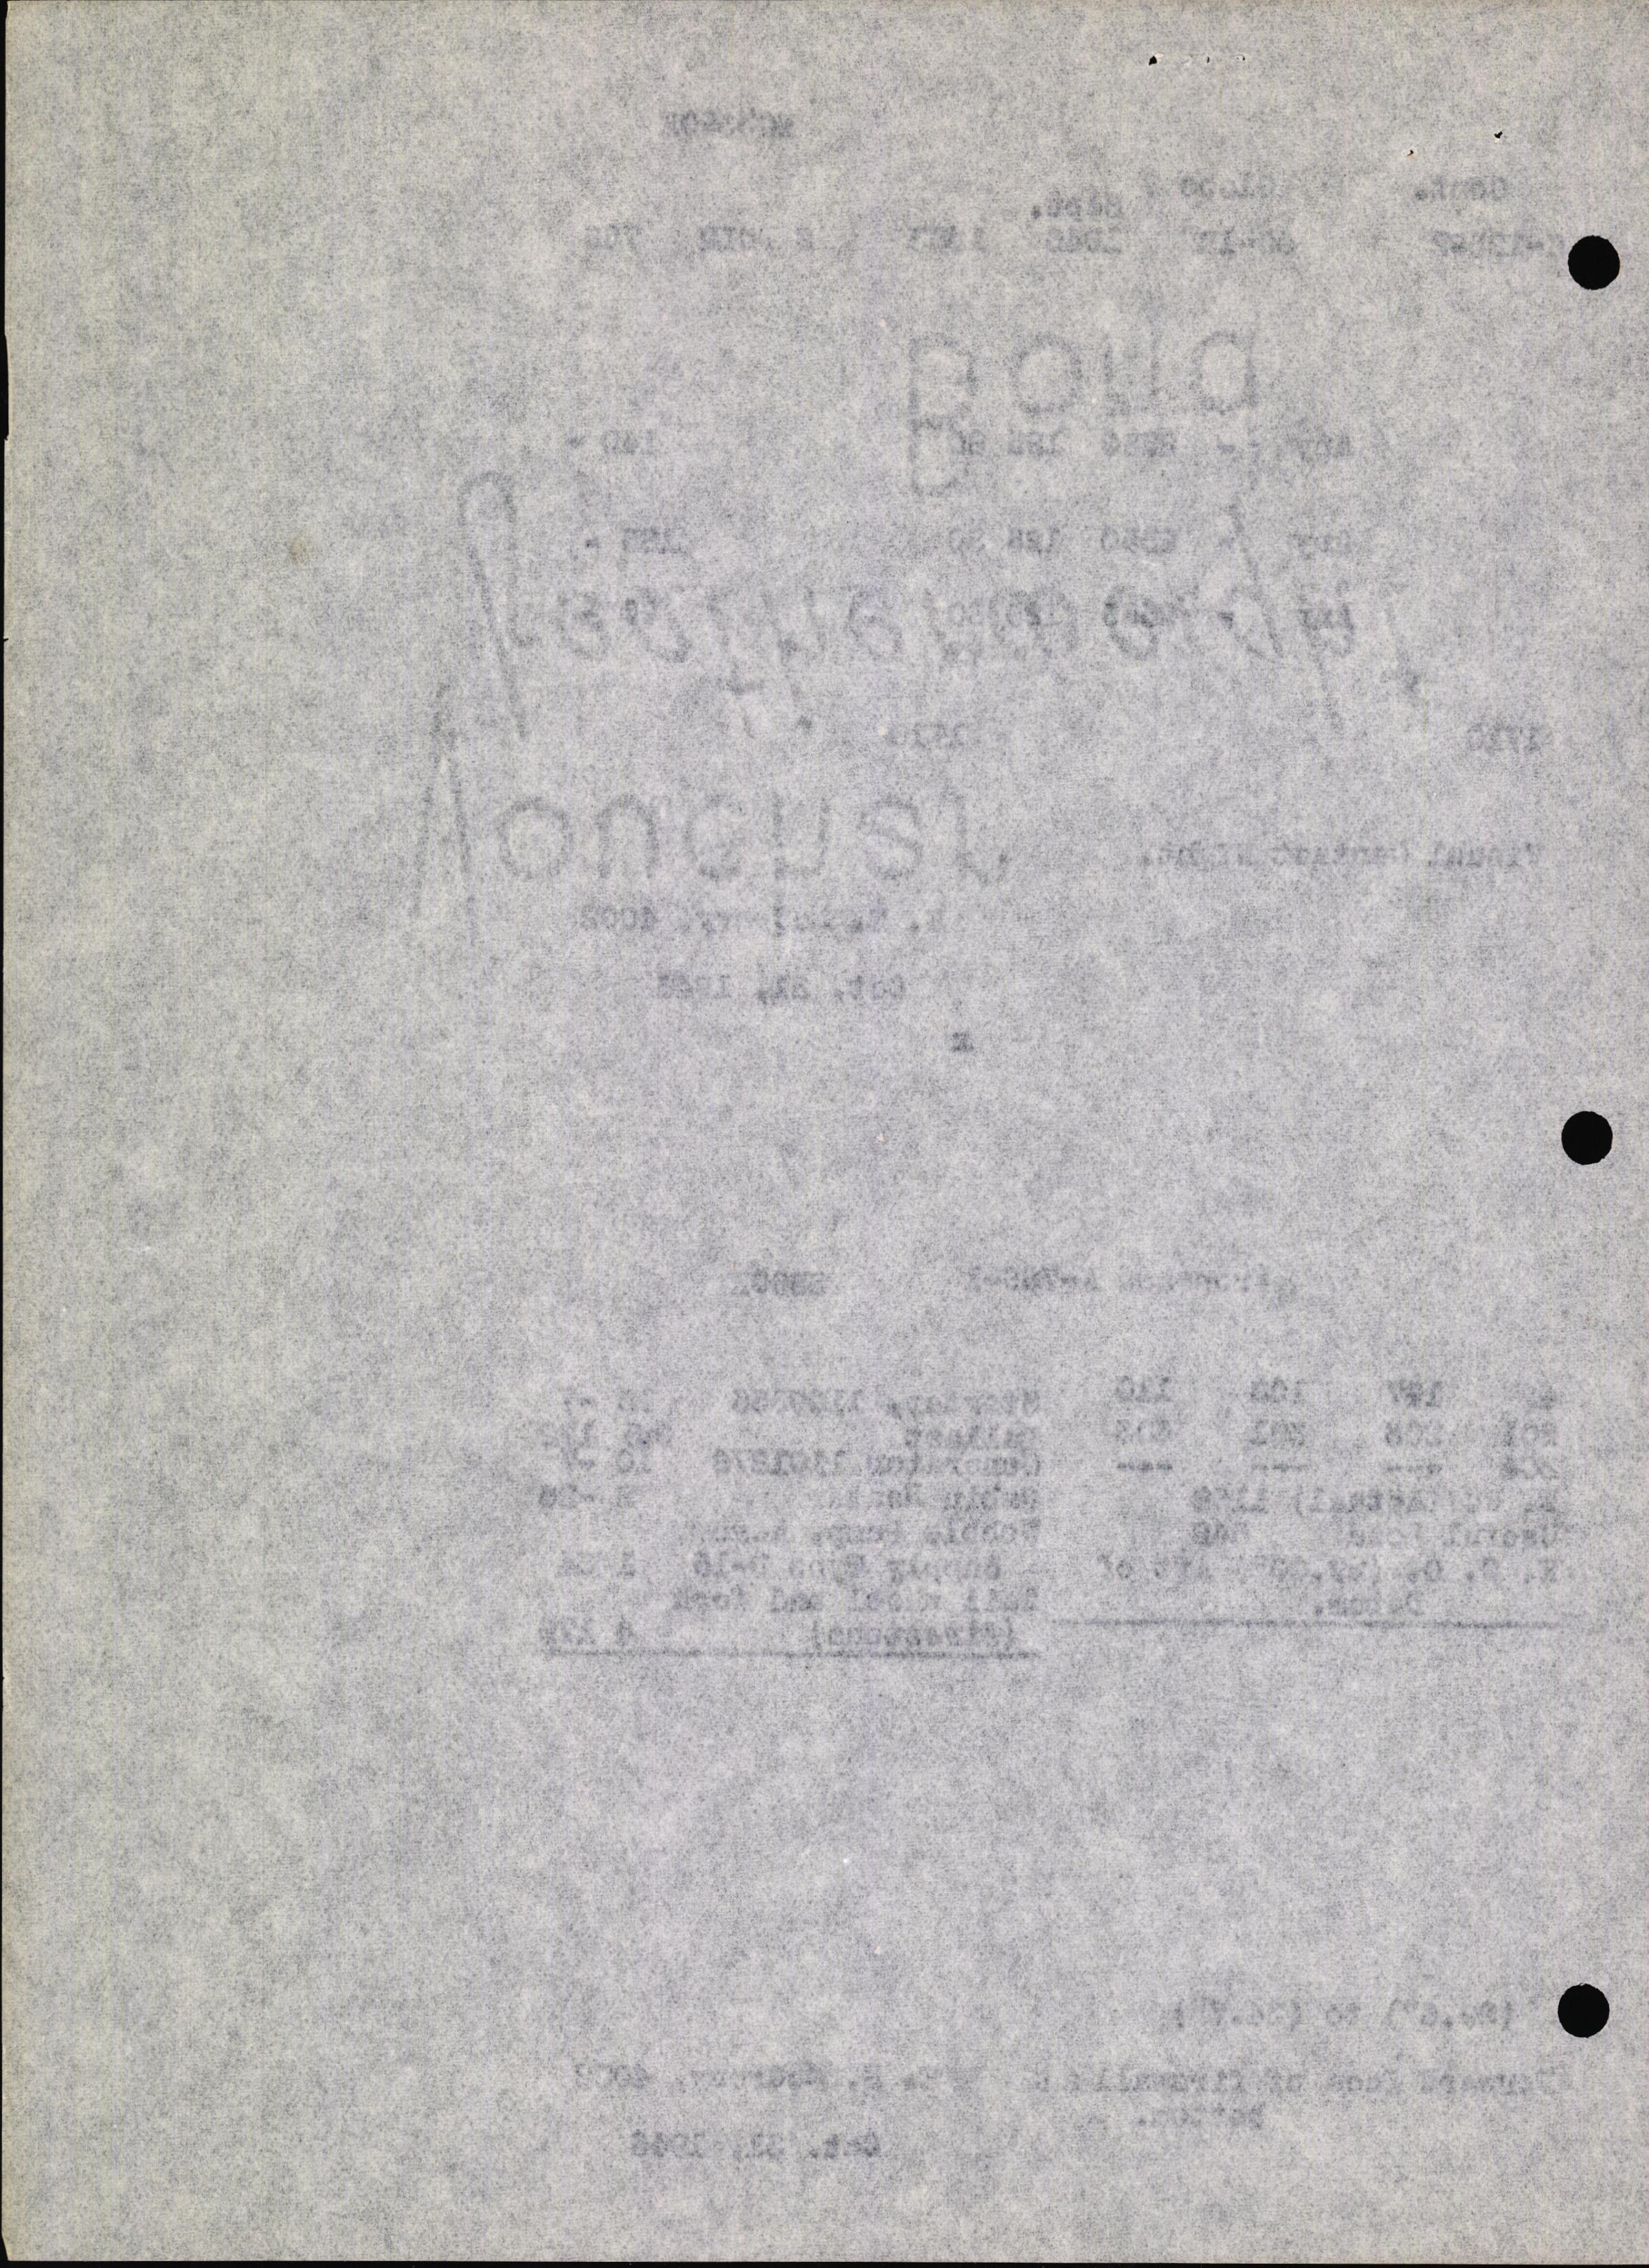 Sample page 8 from AirCorps Library document: Technical Information for Serial Number 1383